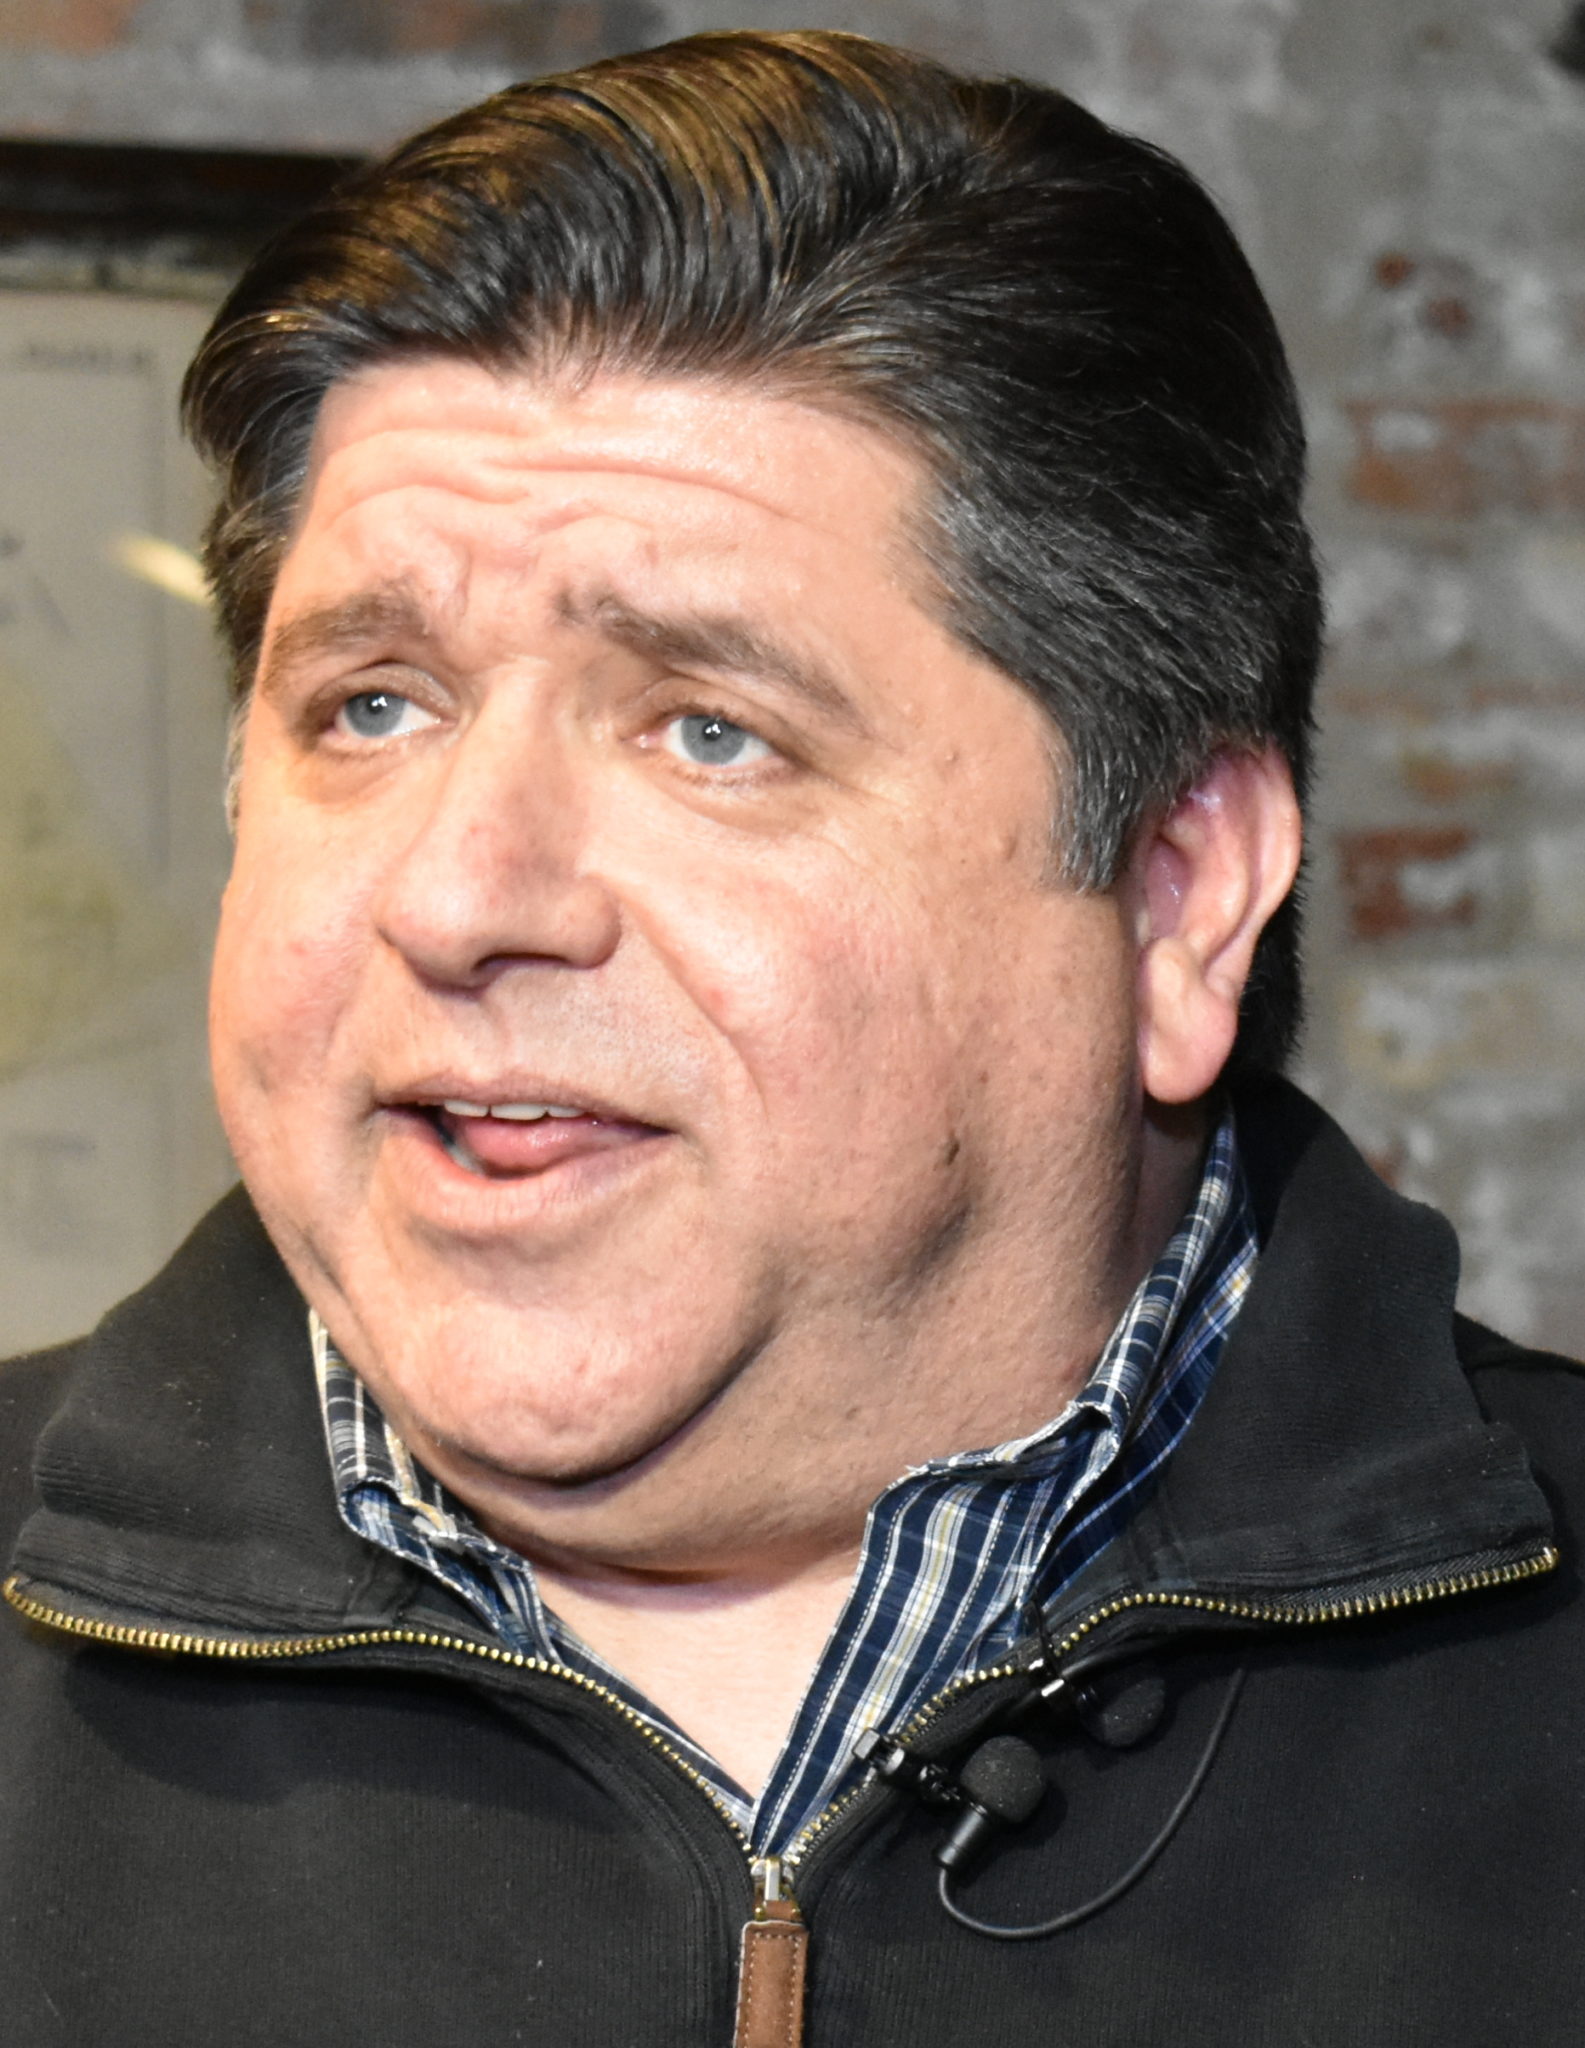 pritzker-s-administration-from-the-people-by-the-politicians-for-the